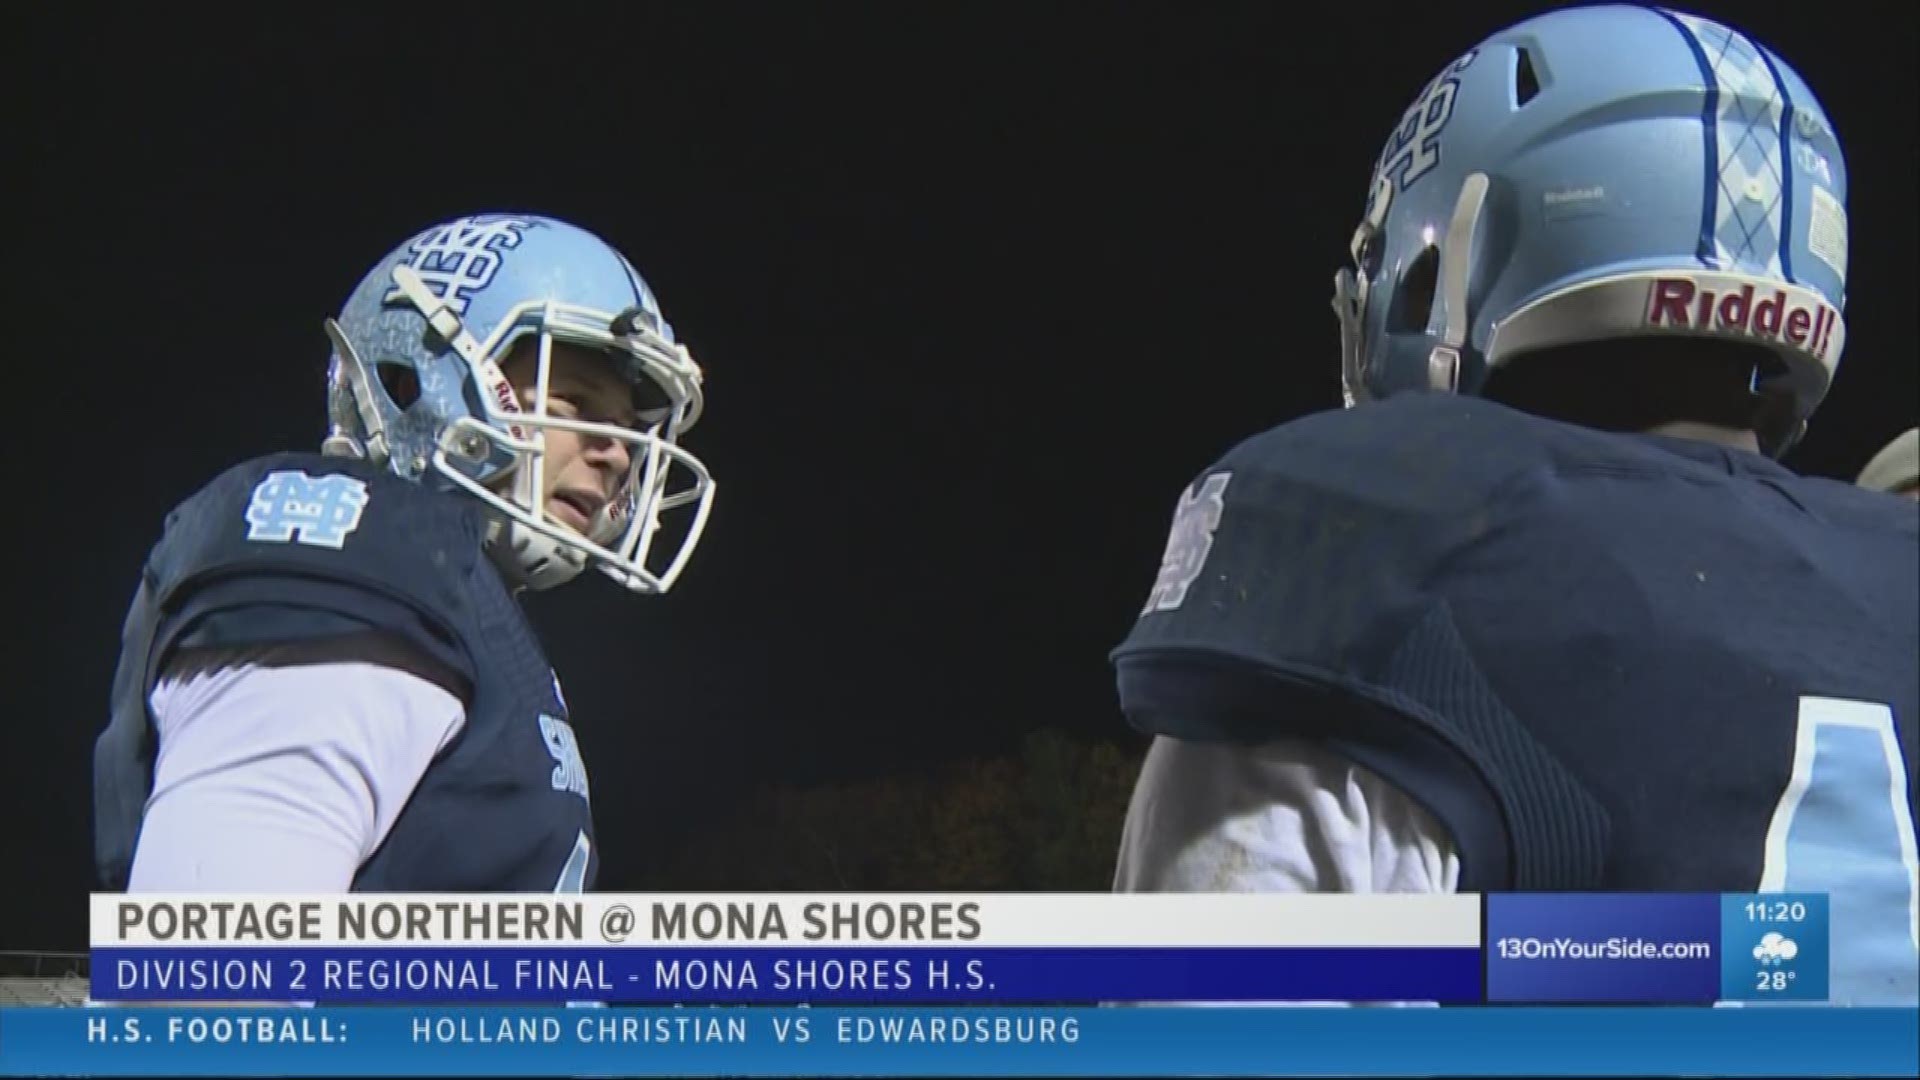 13 On Your Sidelines: Mona Shores vs. Portage Northern